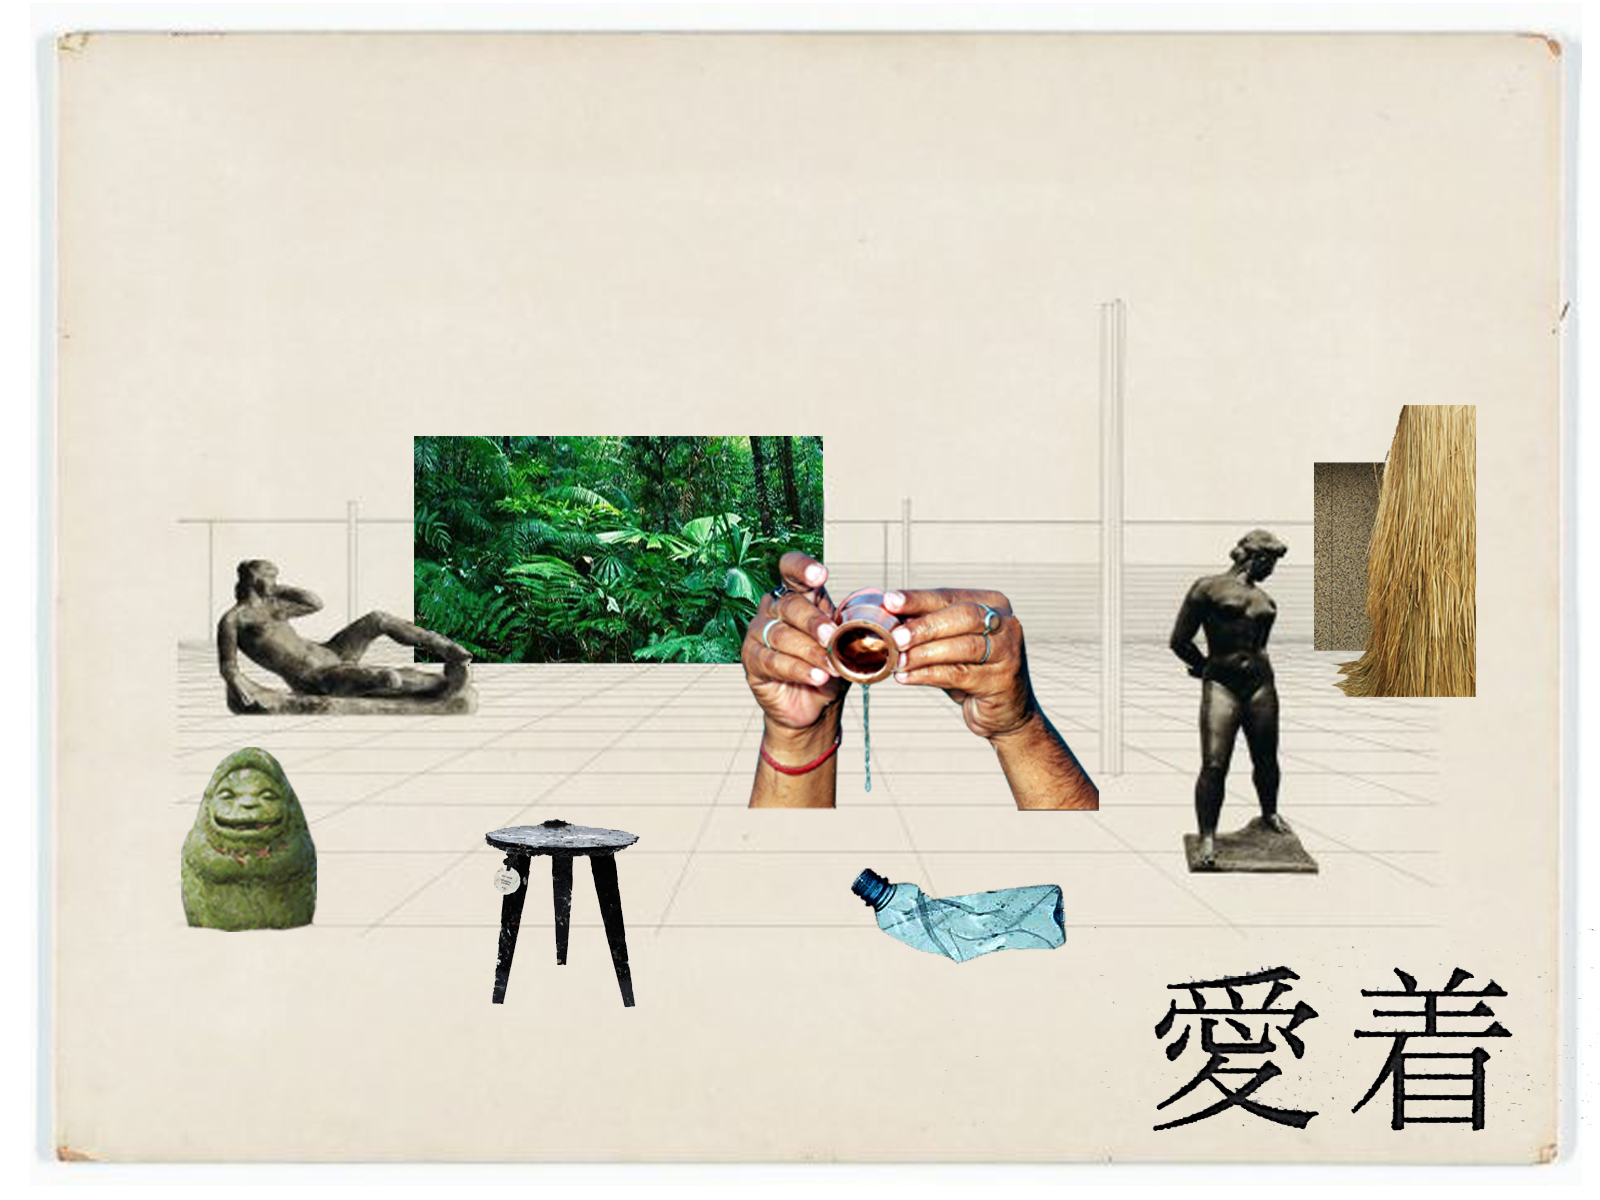 Various objects and imagery (including stone sculptures of female nudes, a crushed plastic water bottle, a three-legged chair made of harvested ocean plastics, disembodied hands pouring a tiny jug of water, and an image of a lush forest landscape) collaged onto a sparse perspectival line drawing on an off-white background.